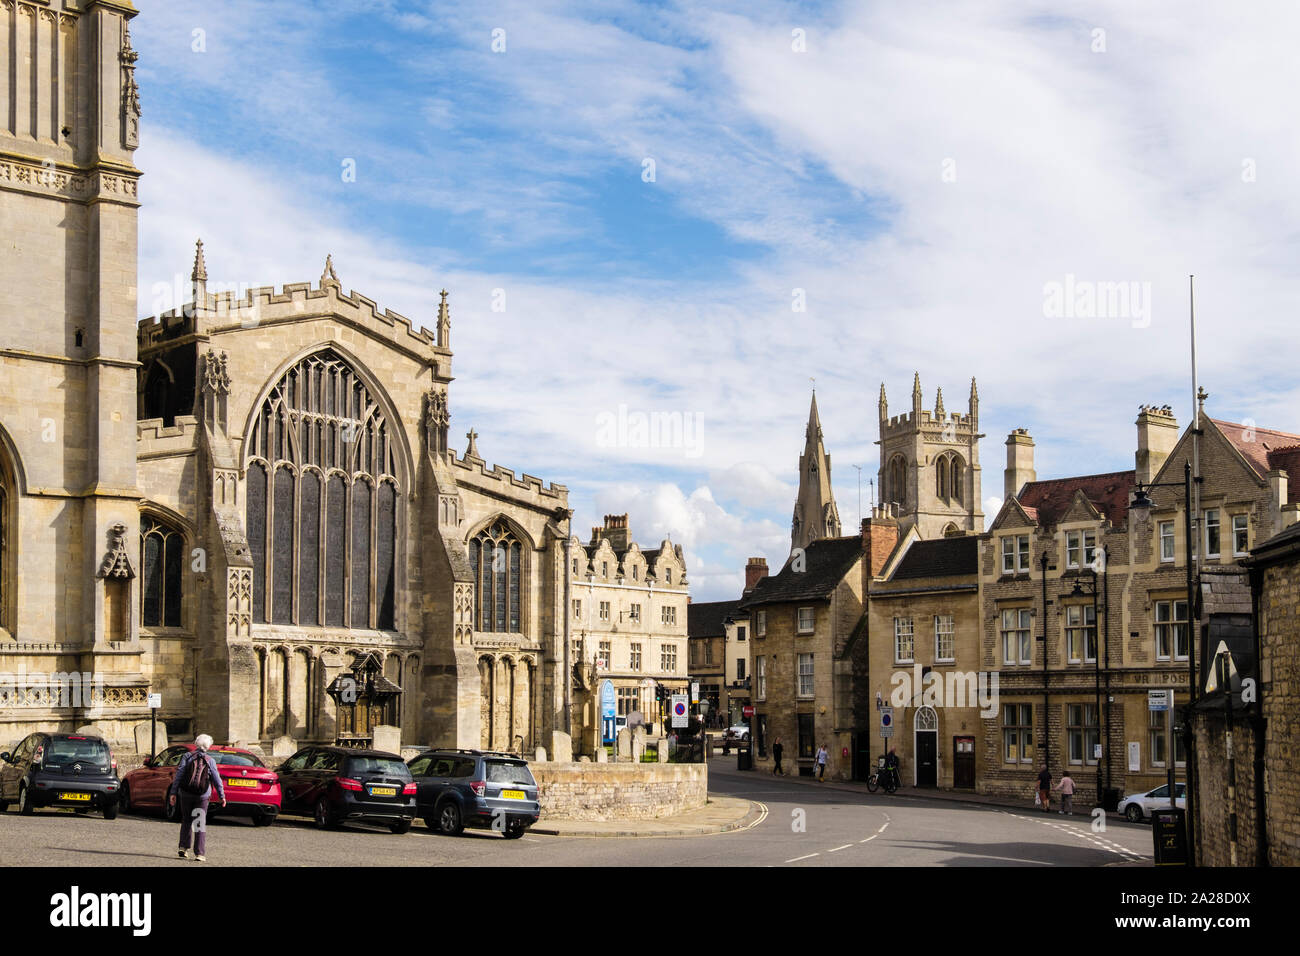 Old limestone buildings and All Saints Church. All Saints Street, Stamford, Lincolnshire, England, UK, Britain Stock Photo